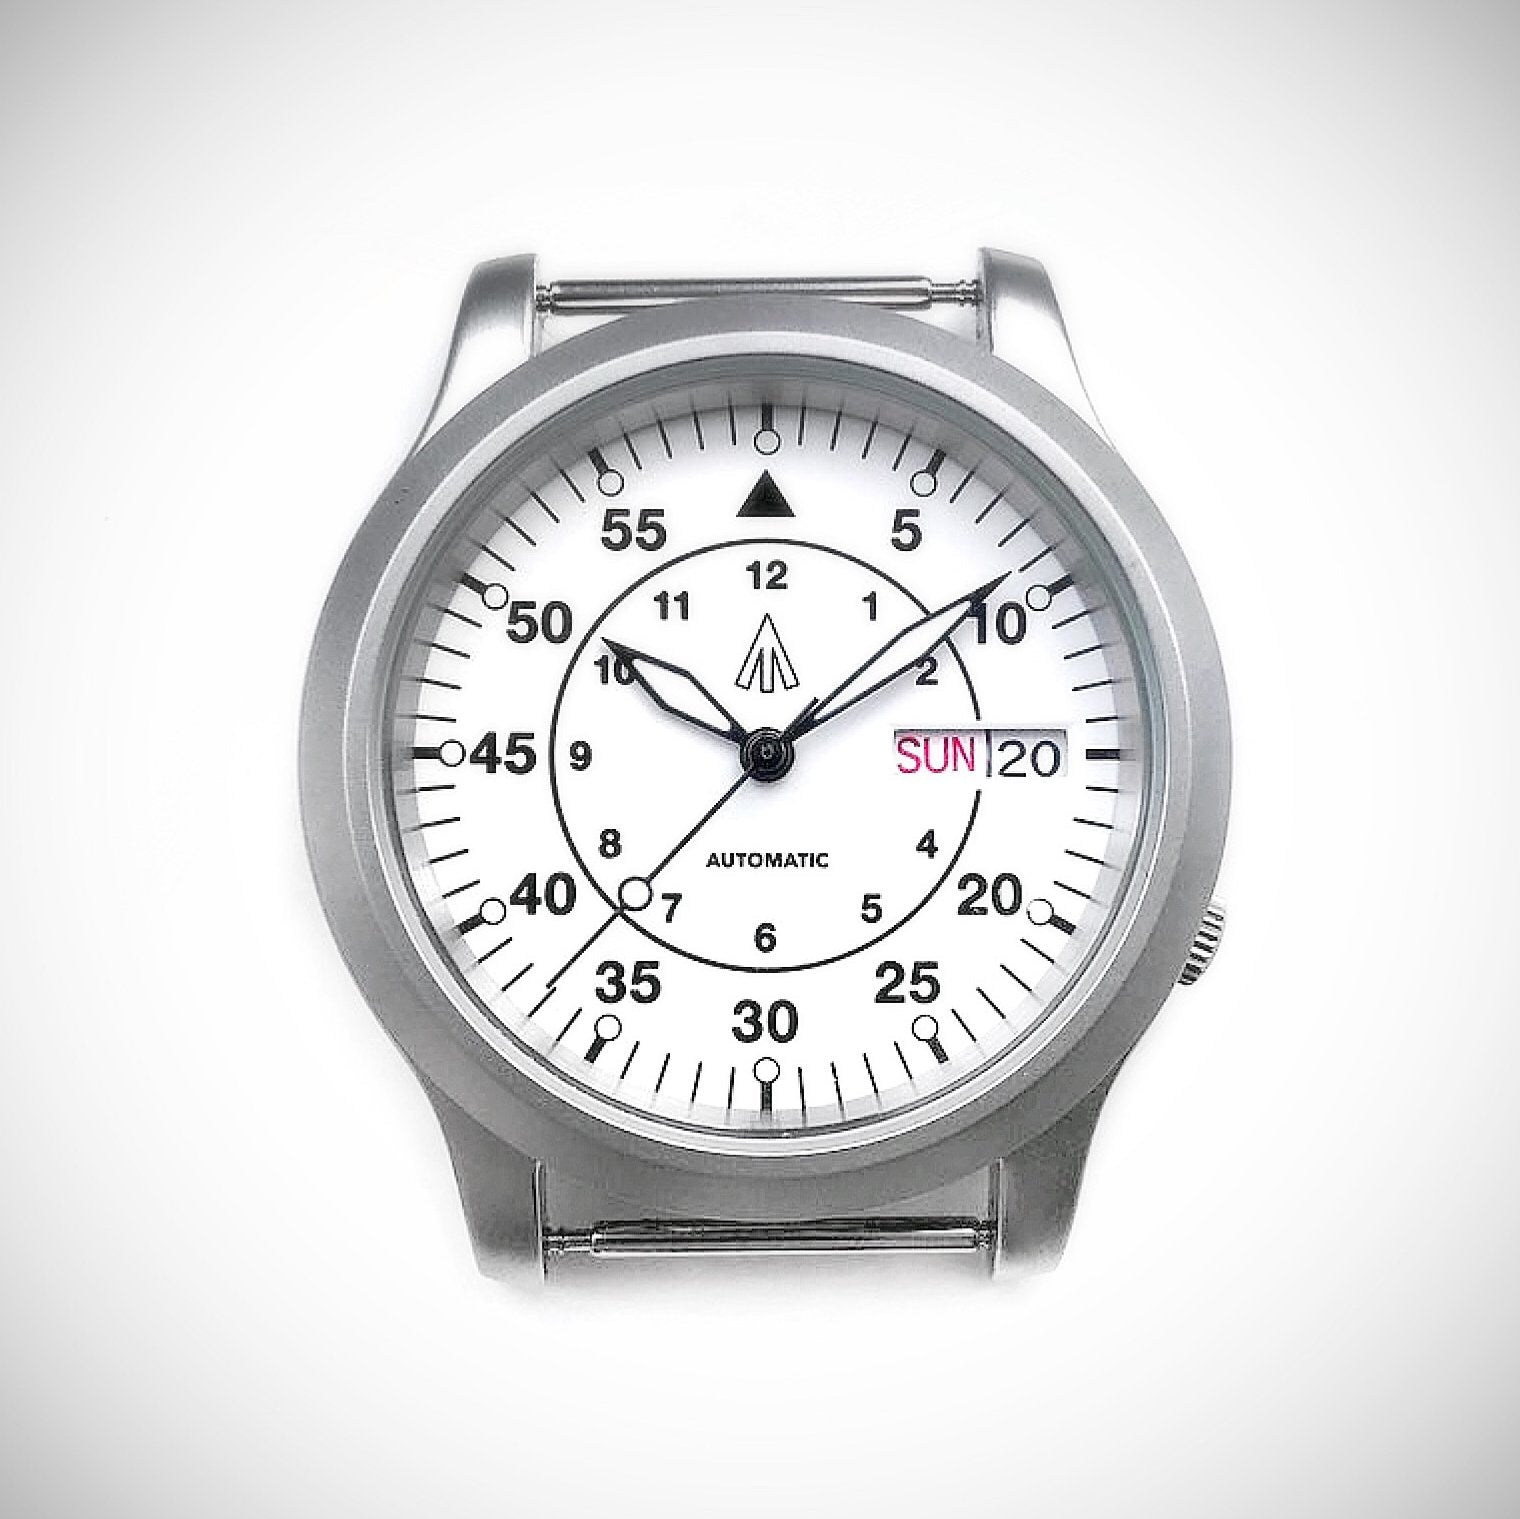 Dial - Mil Spec - White - Day Date